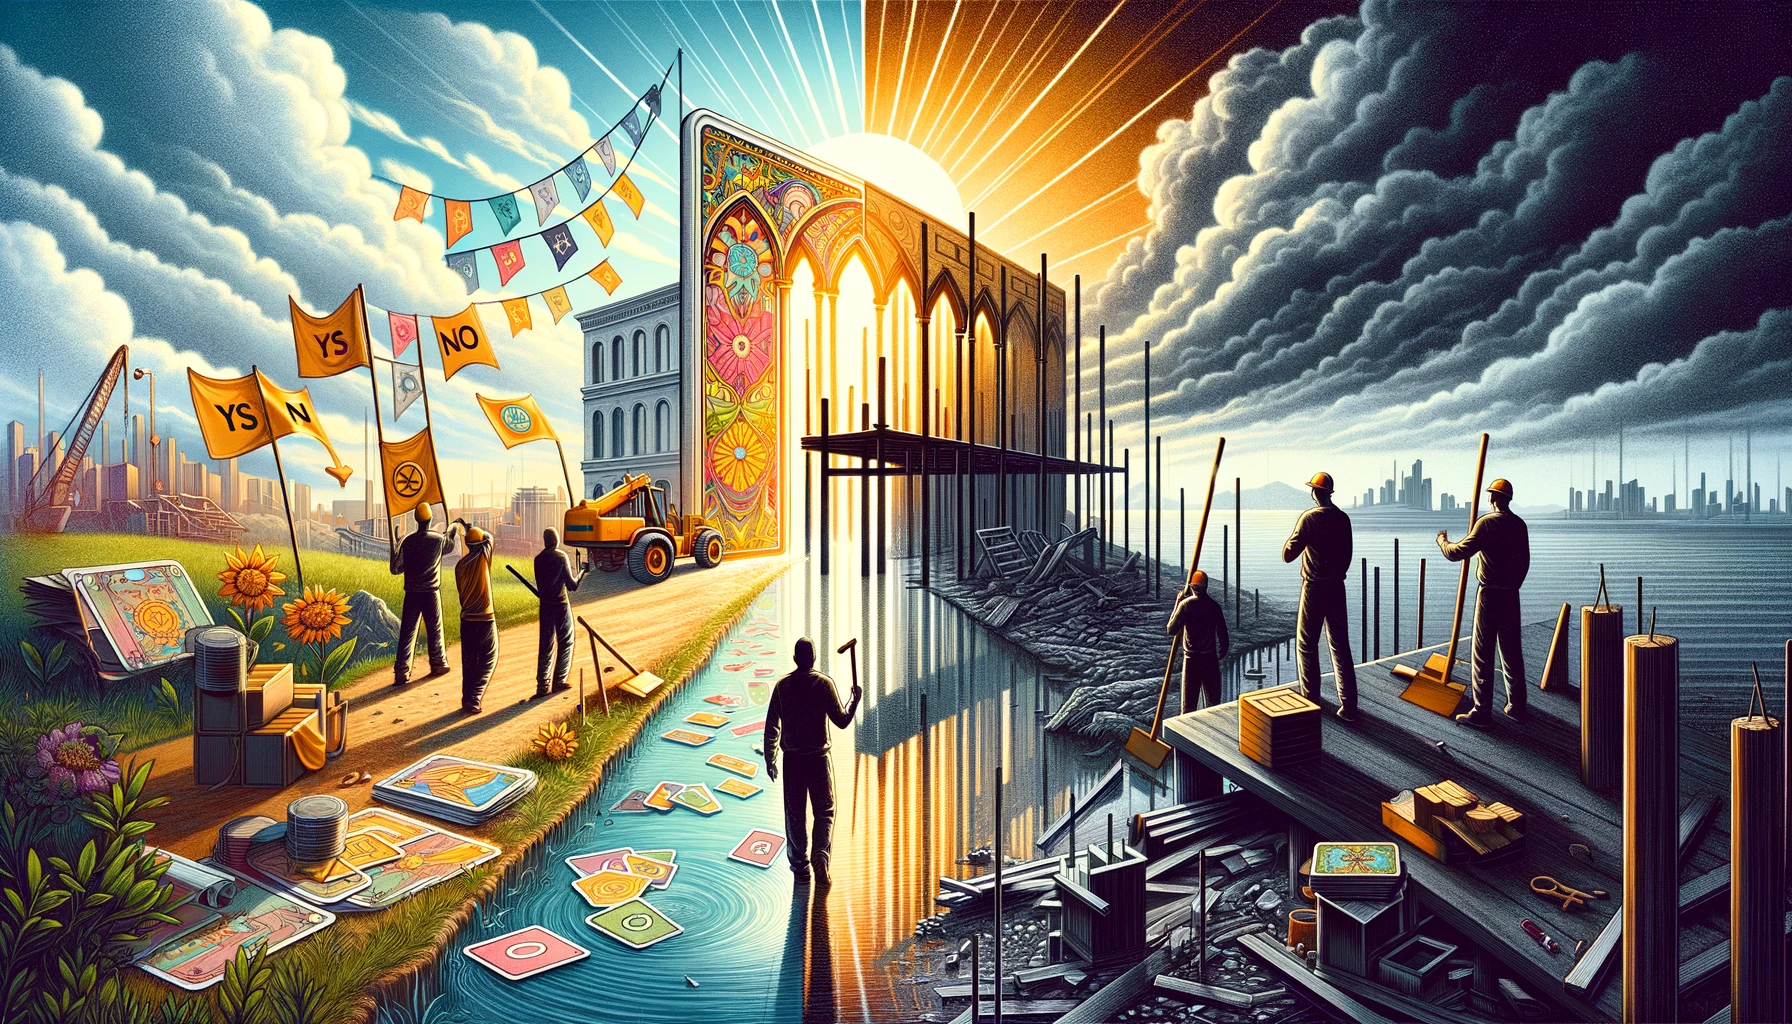 A visual comparison depicting two scenarios: on the left, a vibrant construction site symbolizing progress and teamwork ("Yes"), and on the right, an incomplete project under a cloudy sky, representing setbacks and miscommunication ("No"). This illustration emphasizes the importance of cooperation and effective communication in achieving success, as highlighted by the Three of Pentacles tarot card.